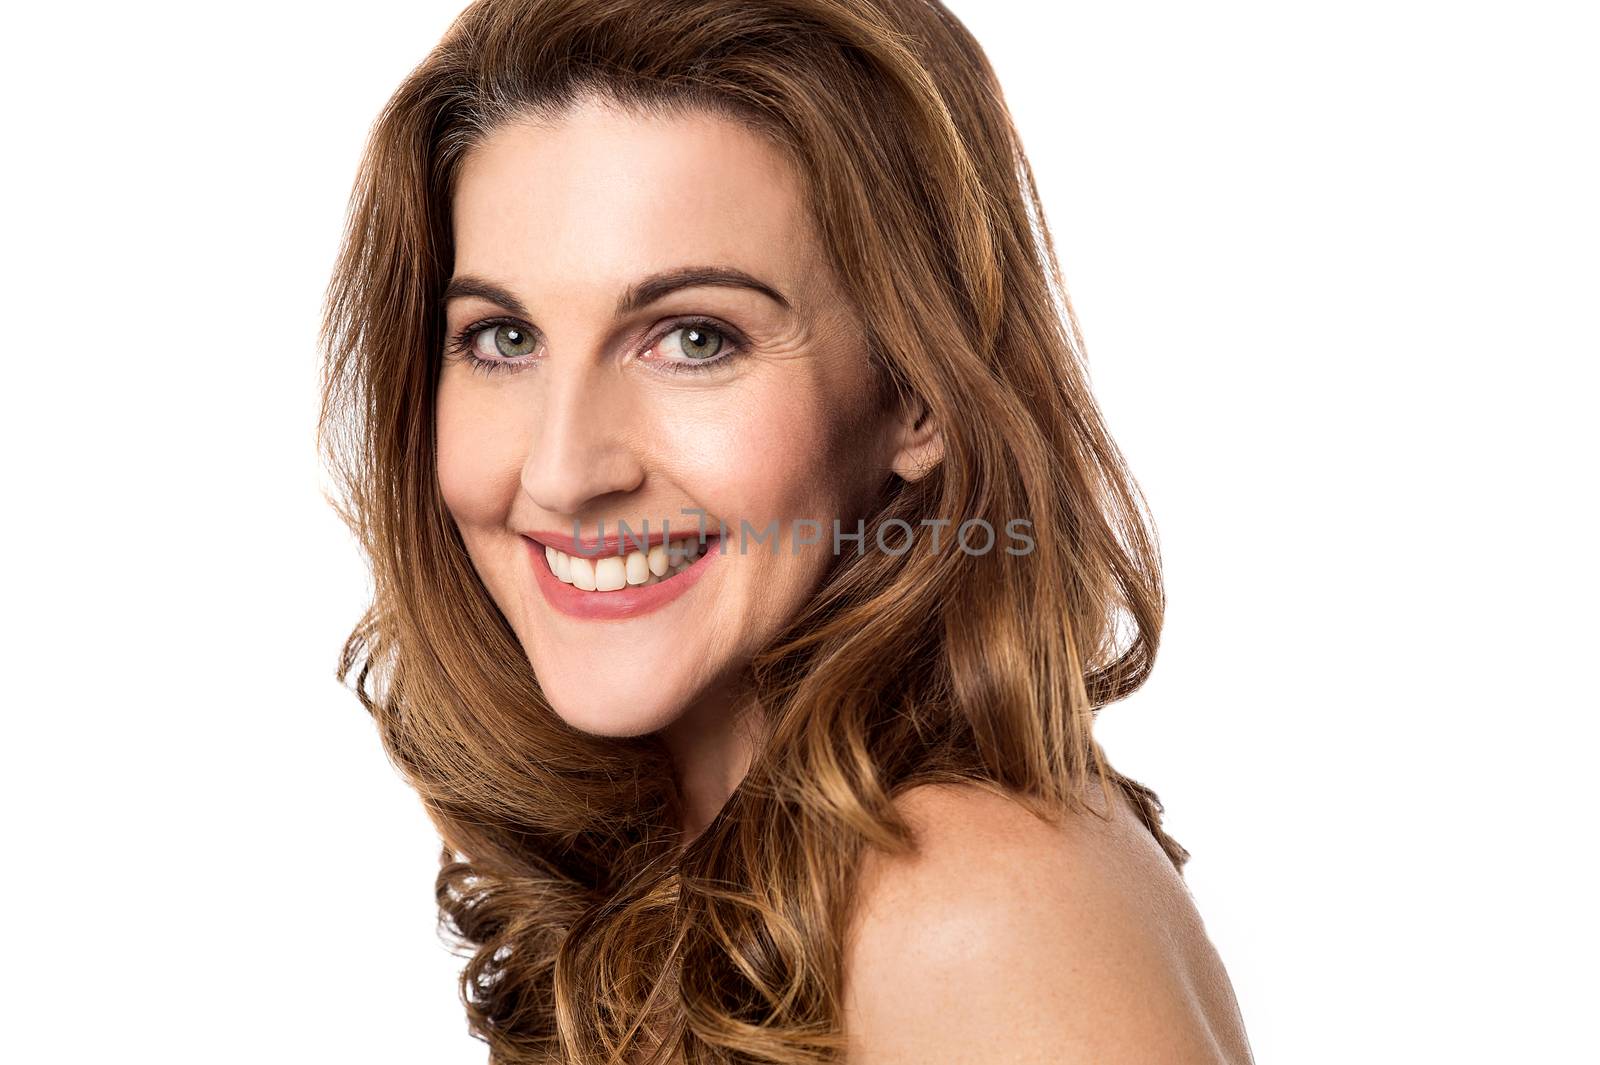 Smiling woman looking into camera by stockyimages